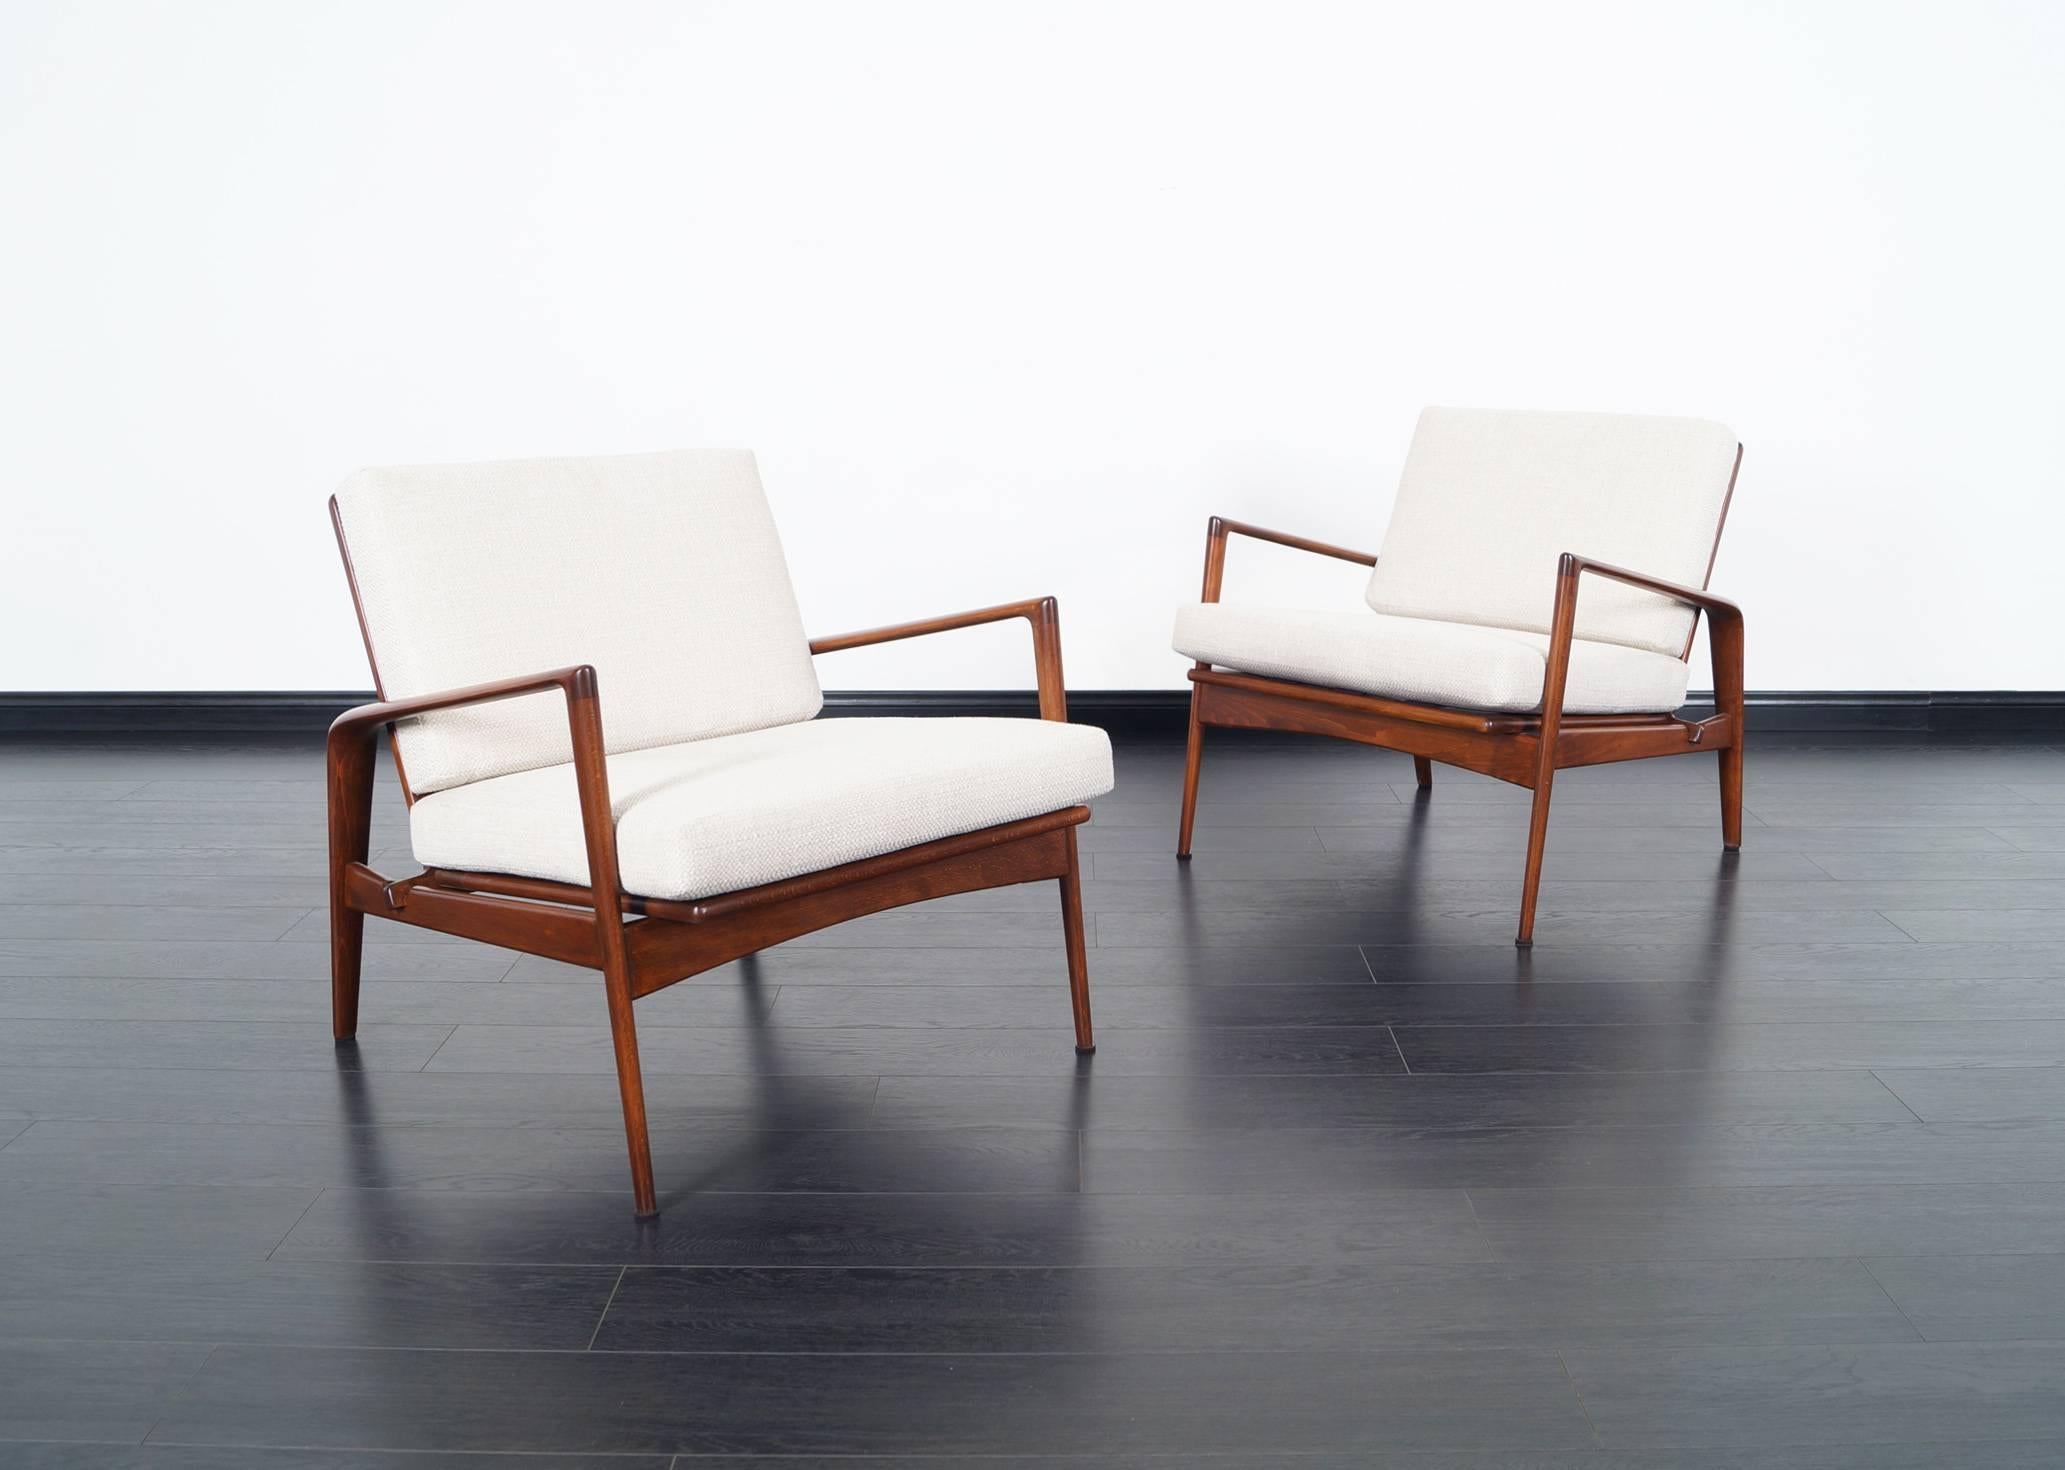 These fabulous rare Danish lounge chairs designed by Ib Kofod Larsen. Features sculptural design and great craftsmanship quality.